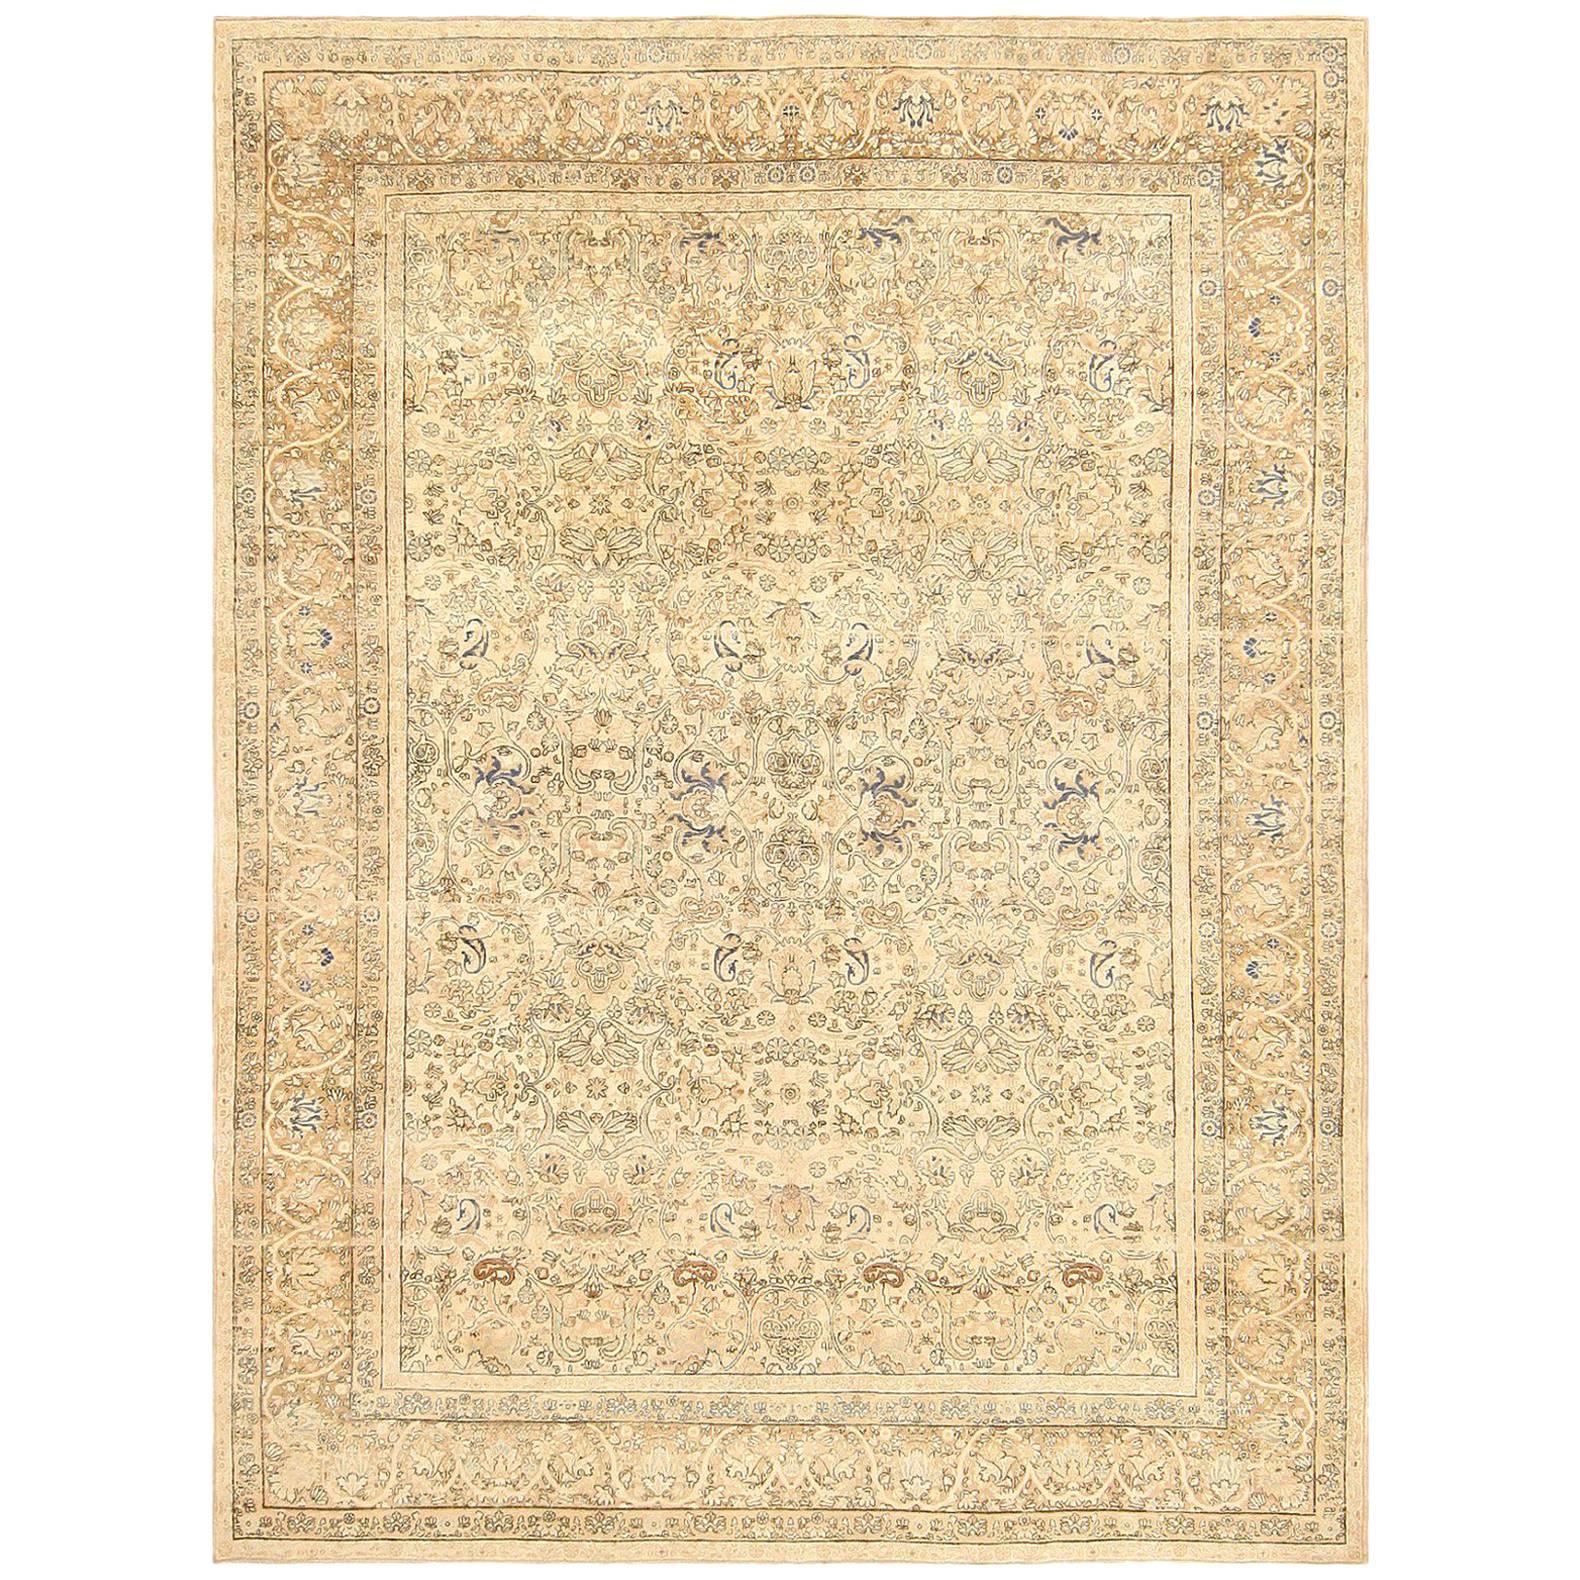 Antique Persian Kerman Rug. Size: 8 ft 10 in x 12 ft (2.69 m x 3.66 m)